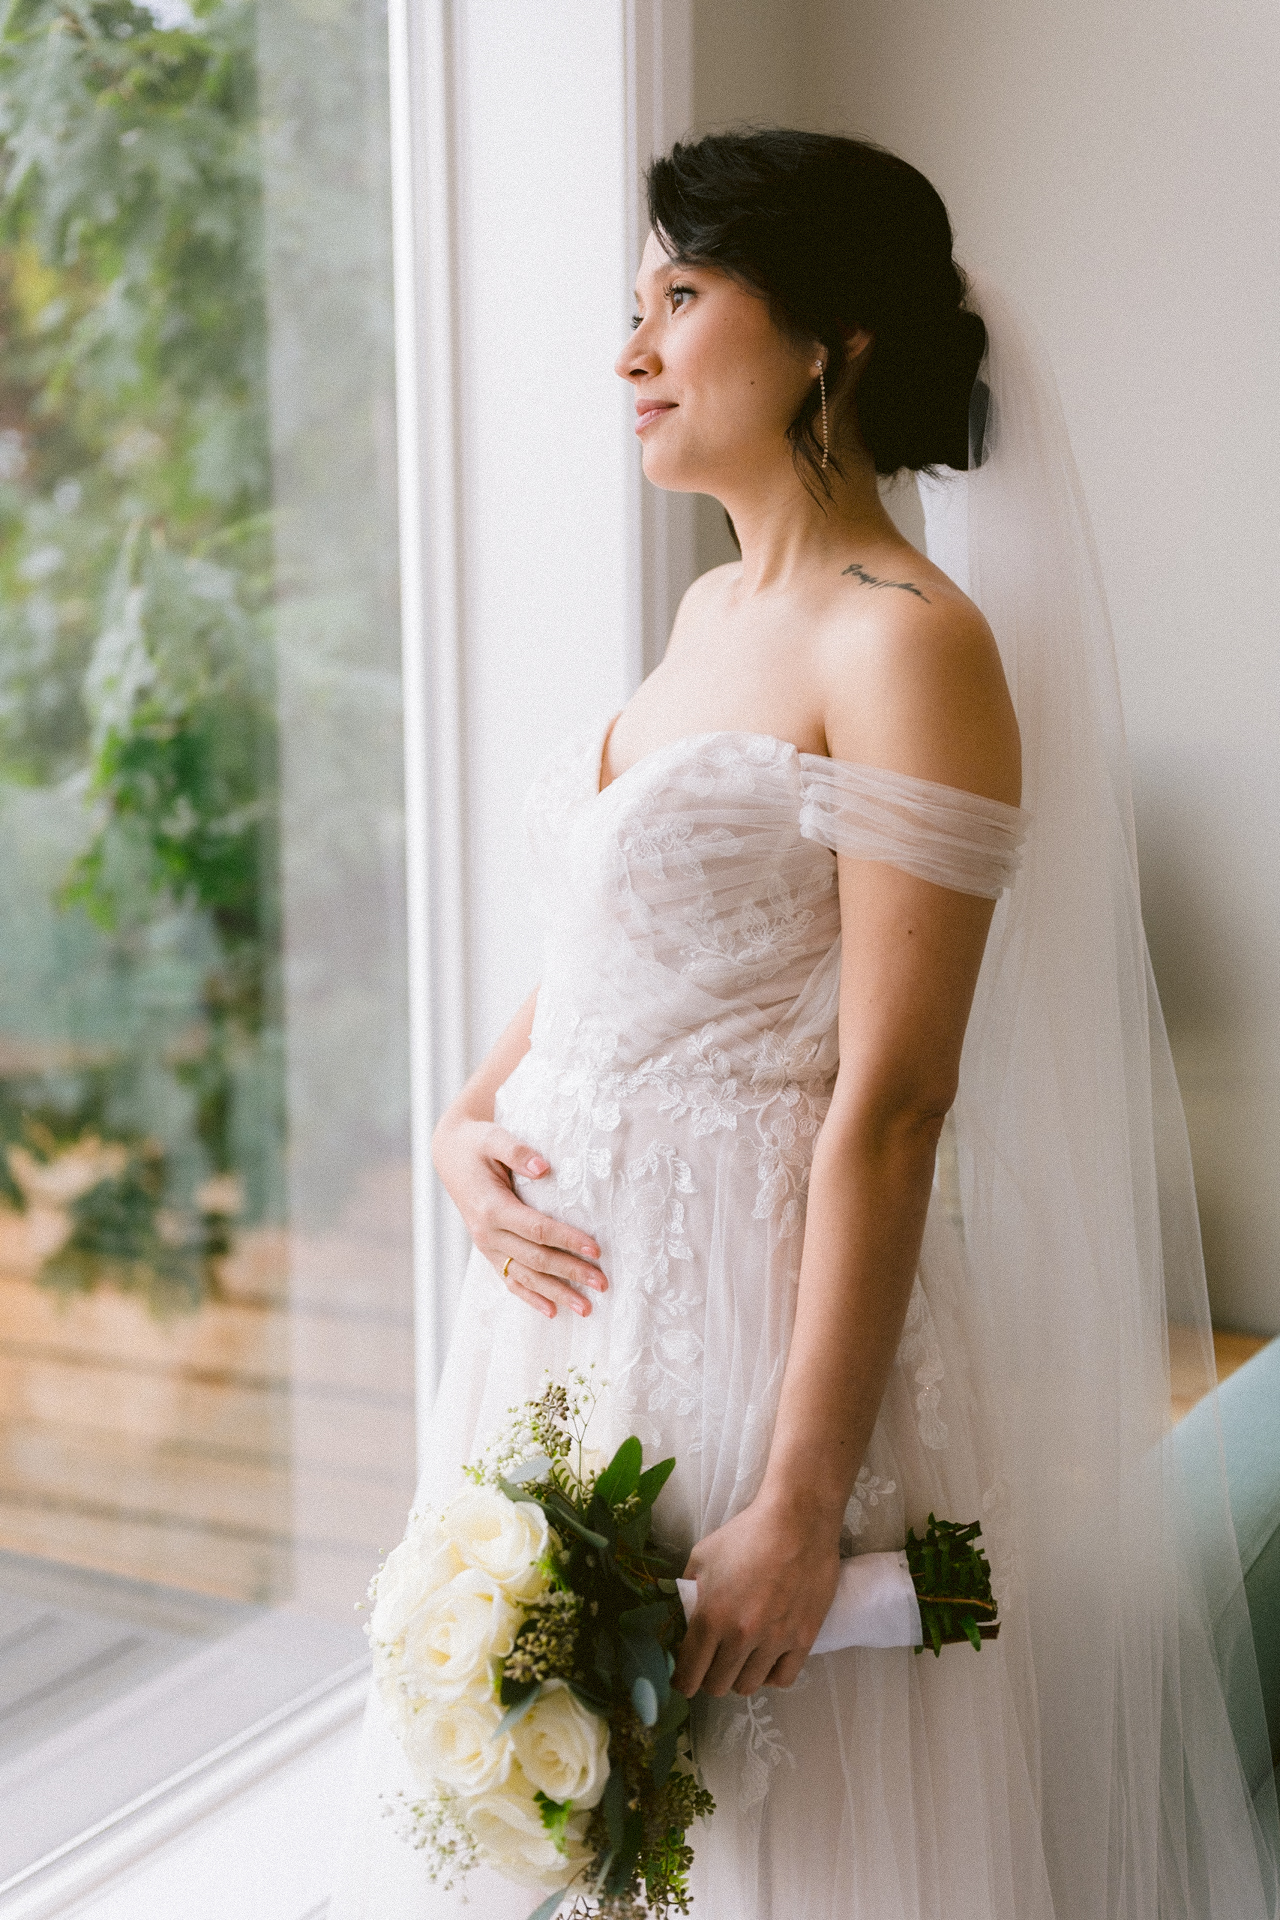 A bride in an off-the-shoulder lace dress with a veil, holding a bouquet, gazes out a window